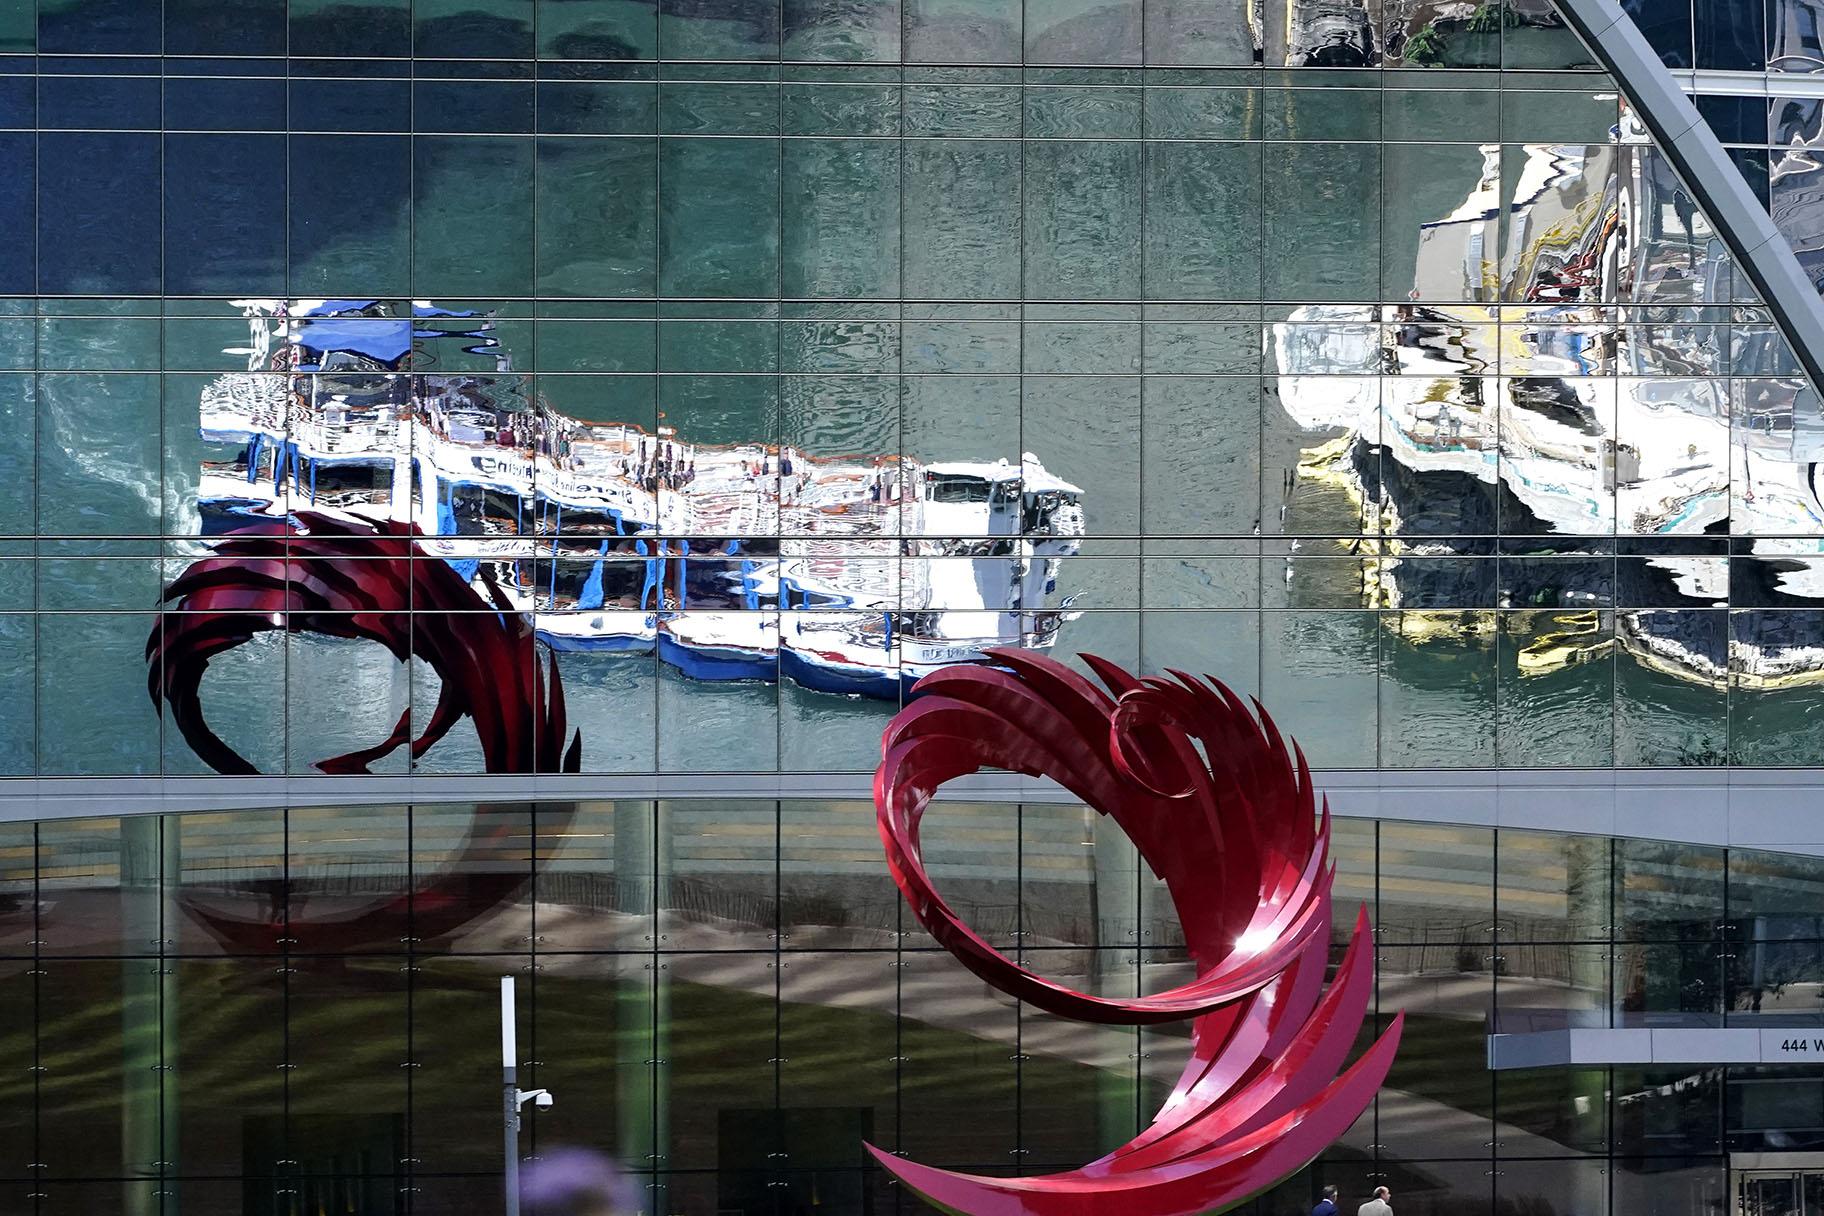 Chicago River tour boats are reflected by a building window in Chicago, Wednesday, Sept. 1, 2021. (AP Photo / Nam Y. Huh)